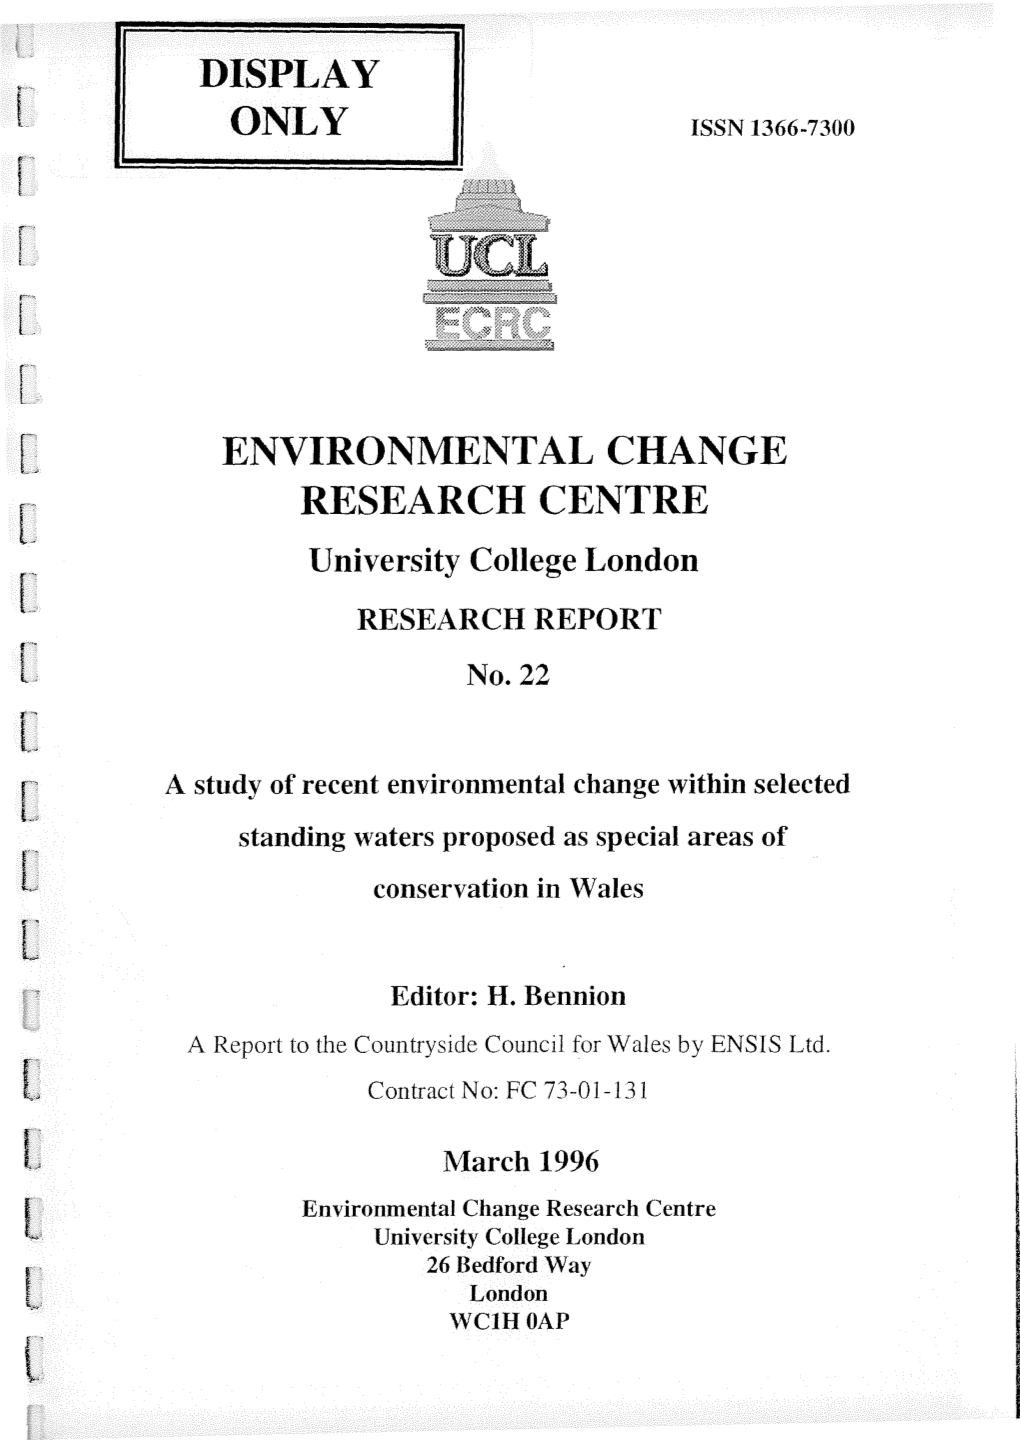 ENVIRONMENTAL CHANGE RESEARCH CENTRE University College London RESEARCH REPORT No